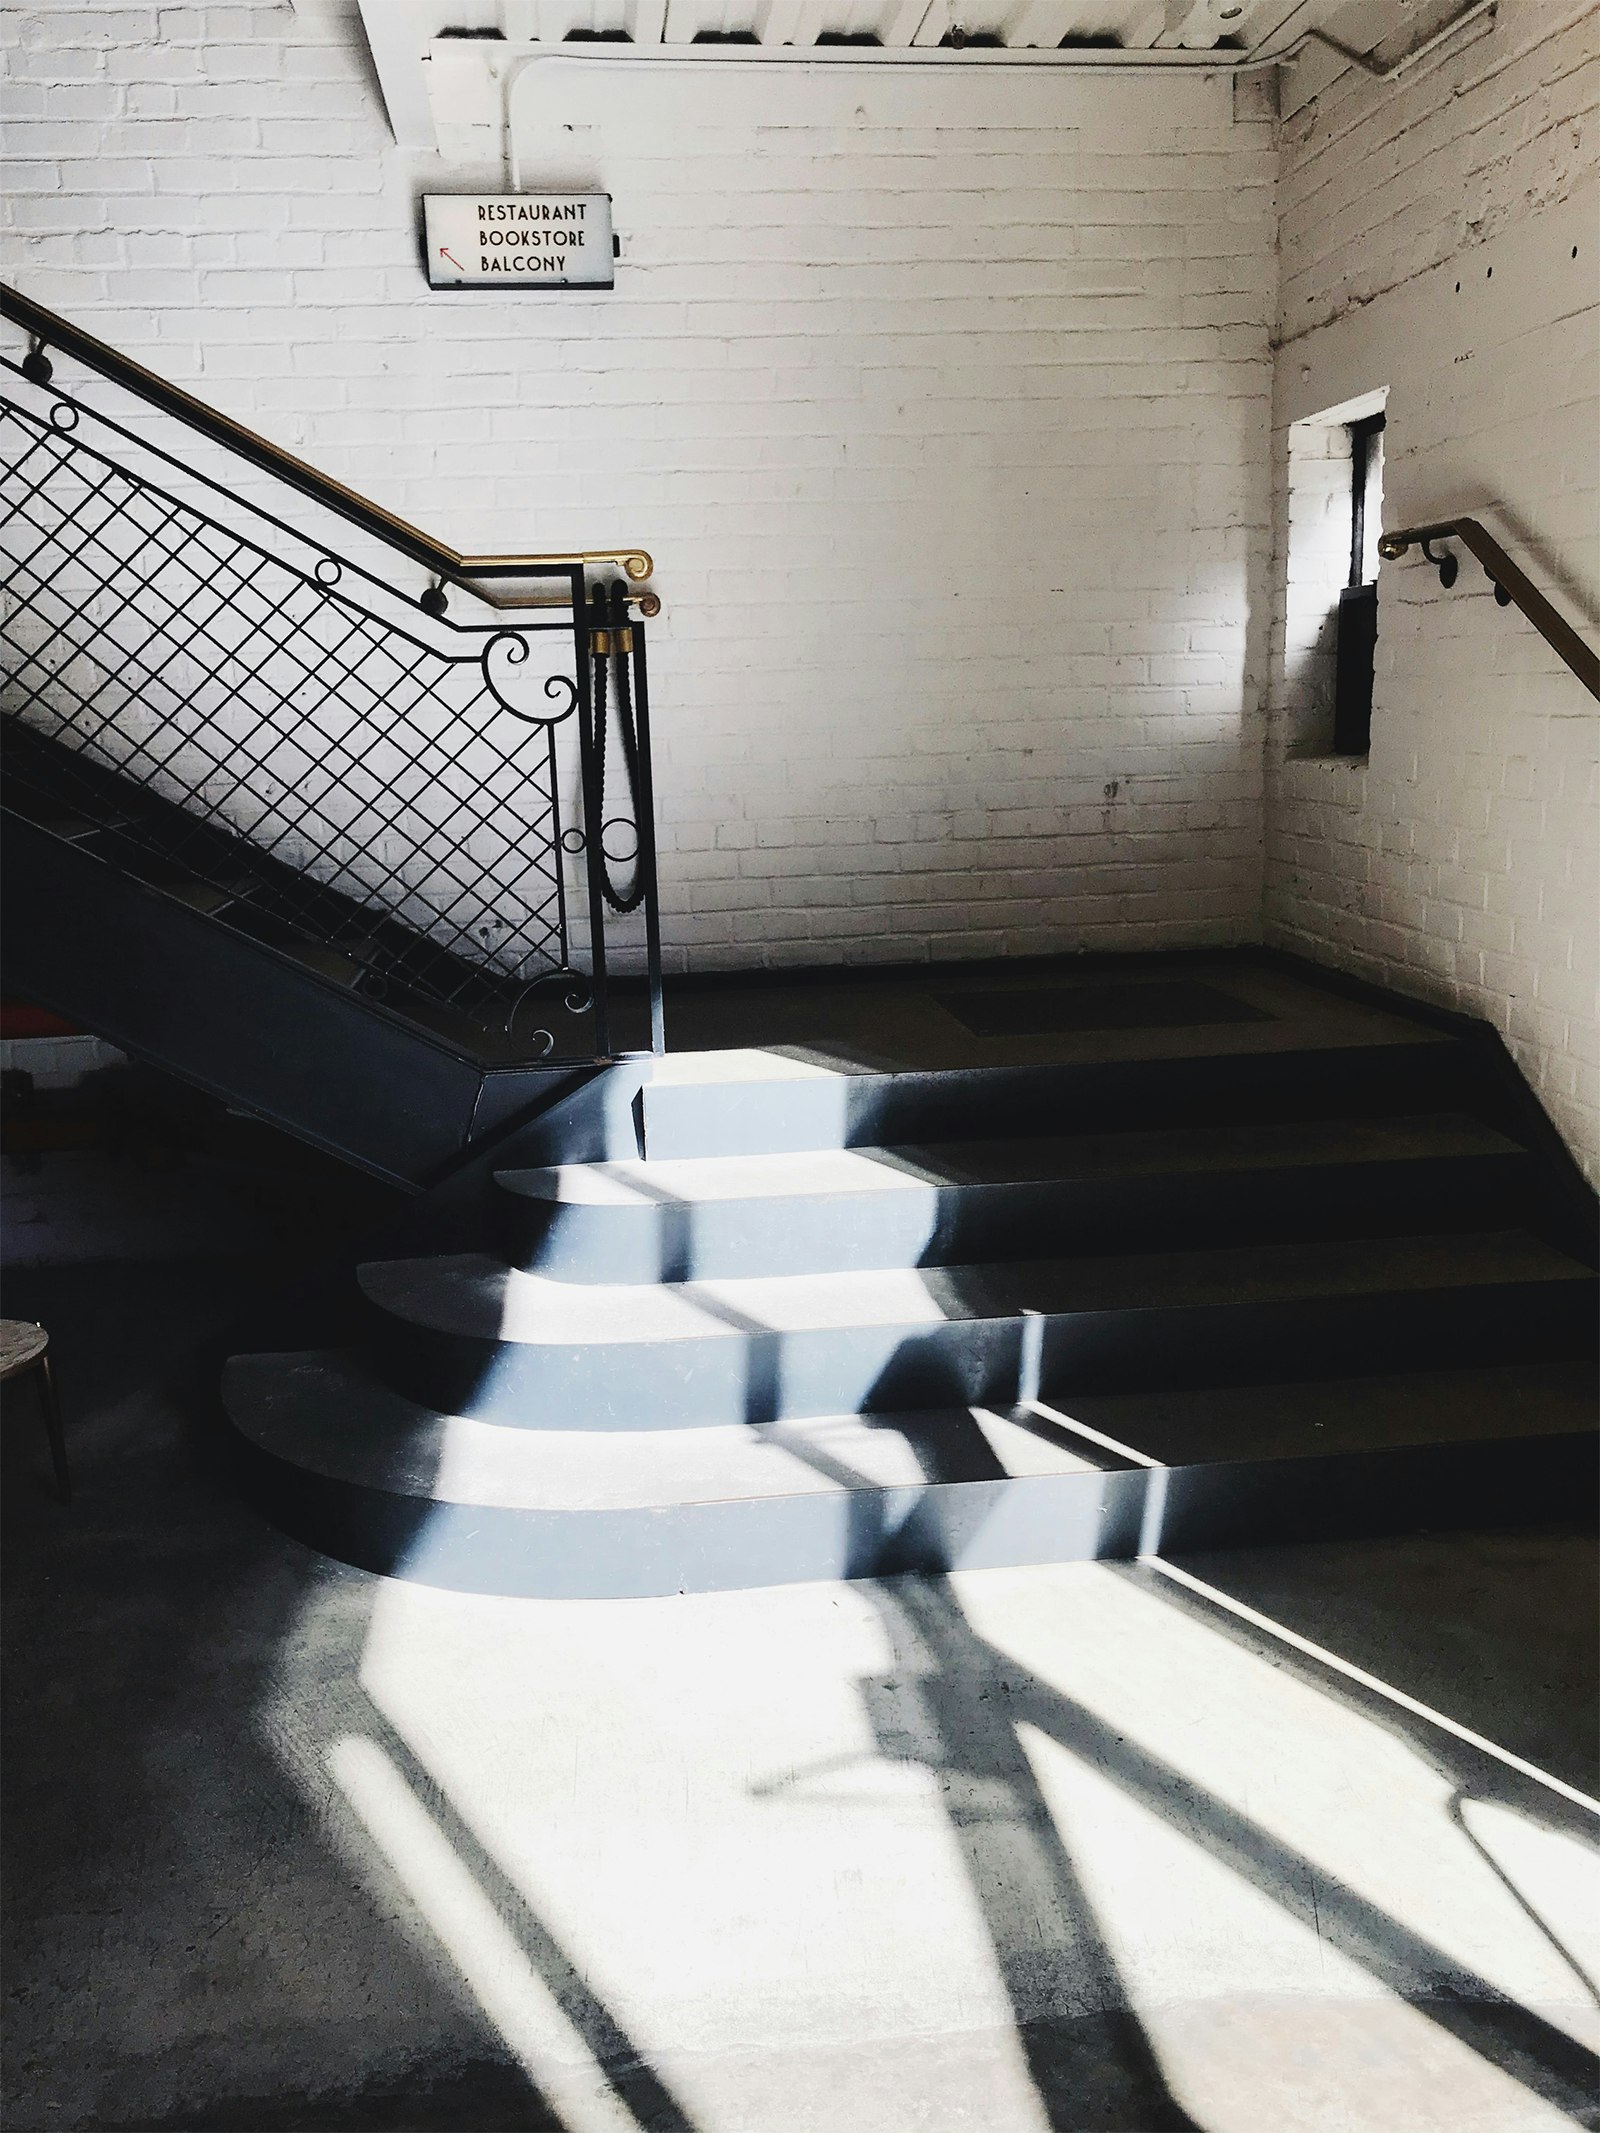 sunlit staircase at Metrograph, a theater on the Lower East Side